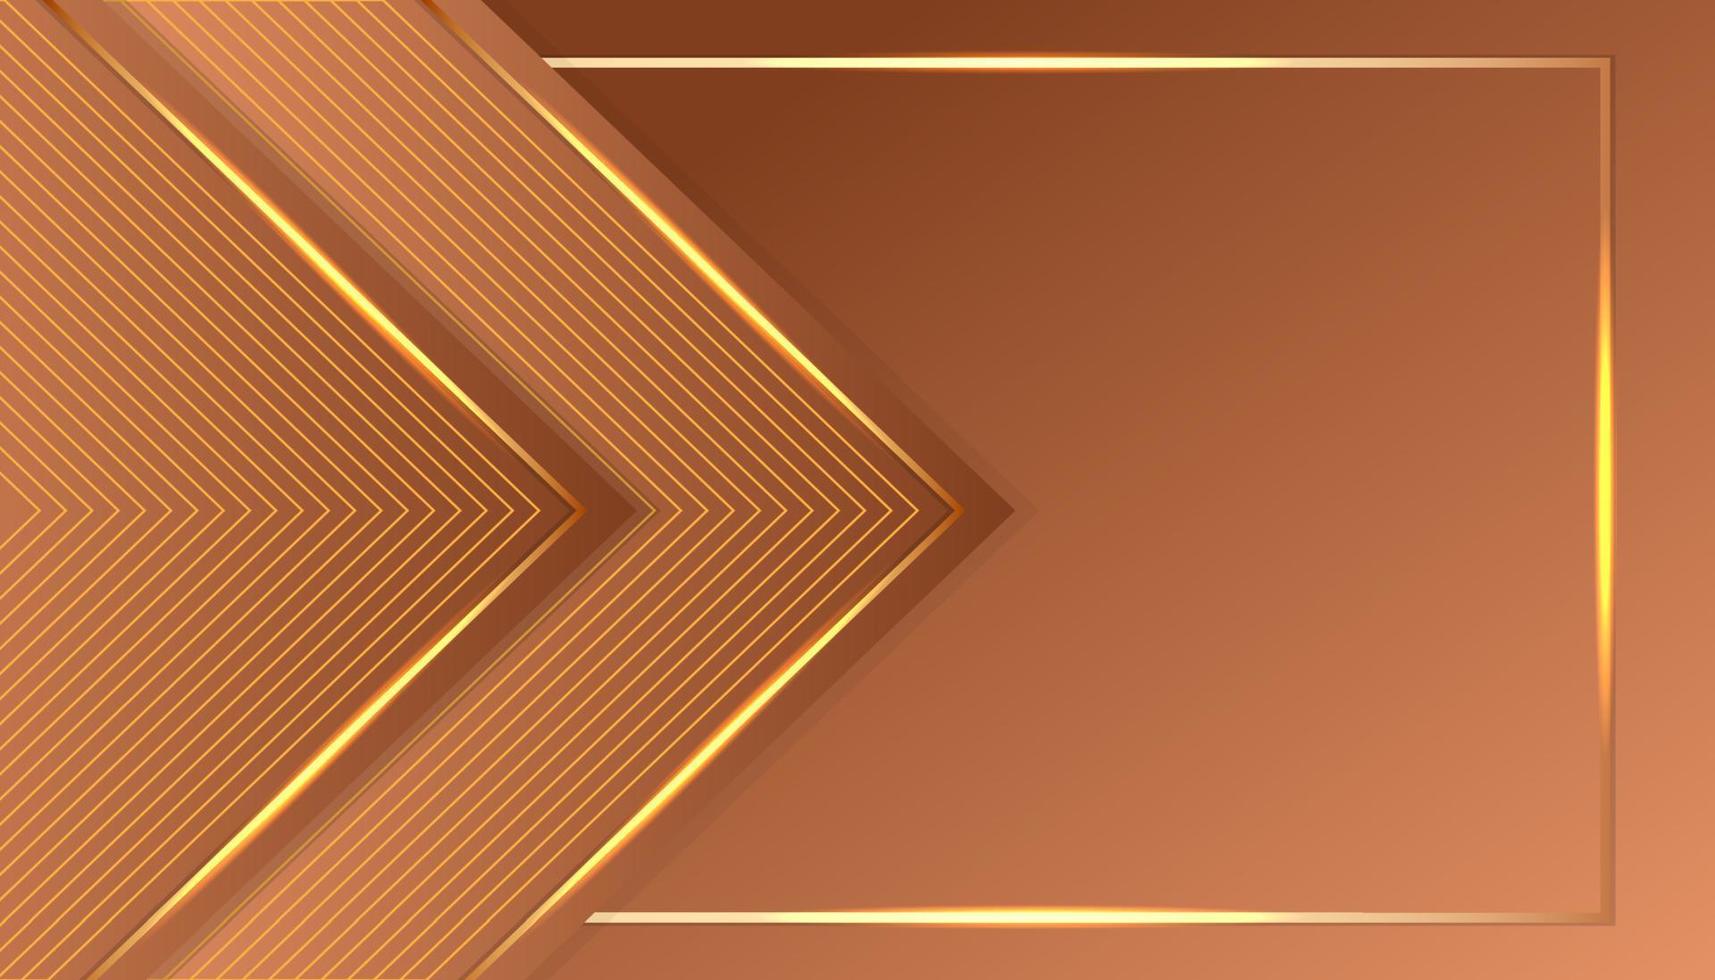 modern luxury abstract background with glowing golden line elements .Beautiful geometric shapes on an elegant golden brown gradient background. vector